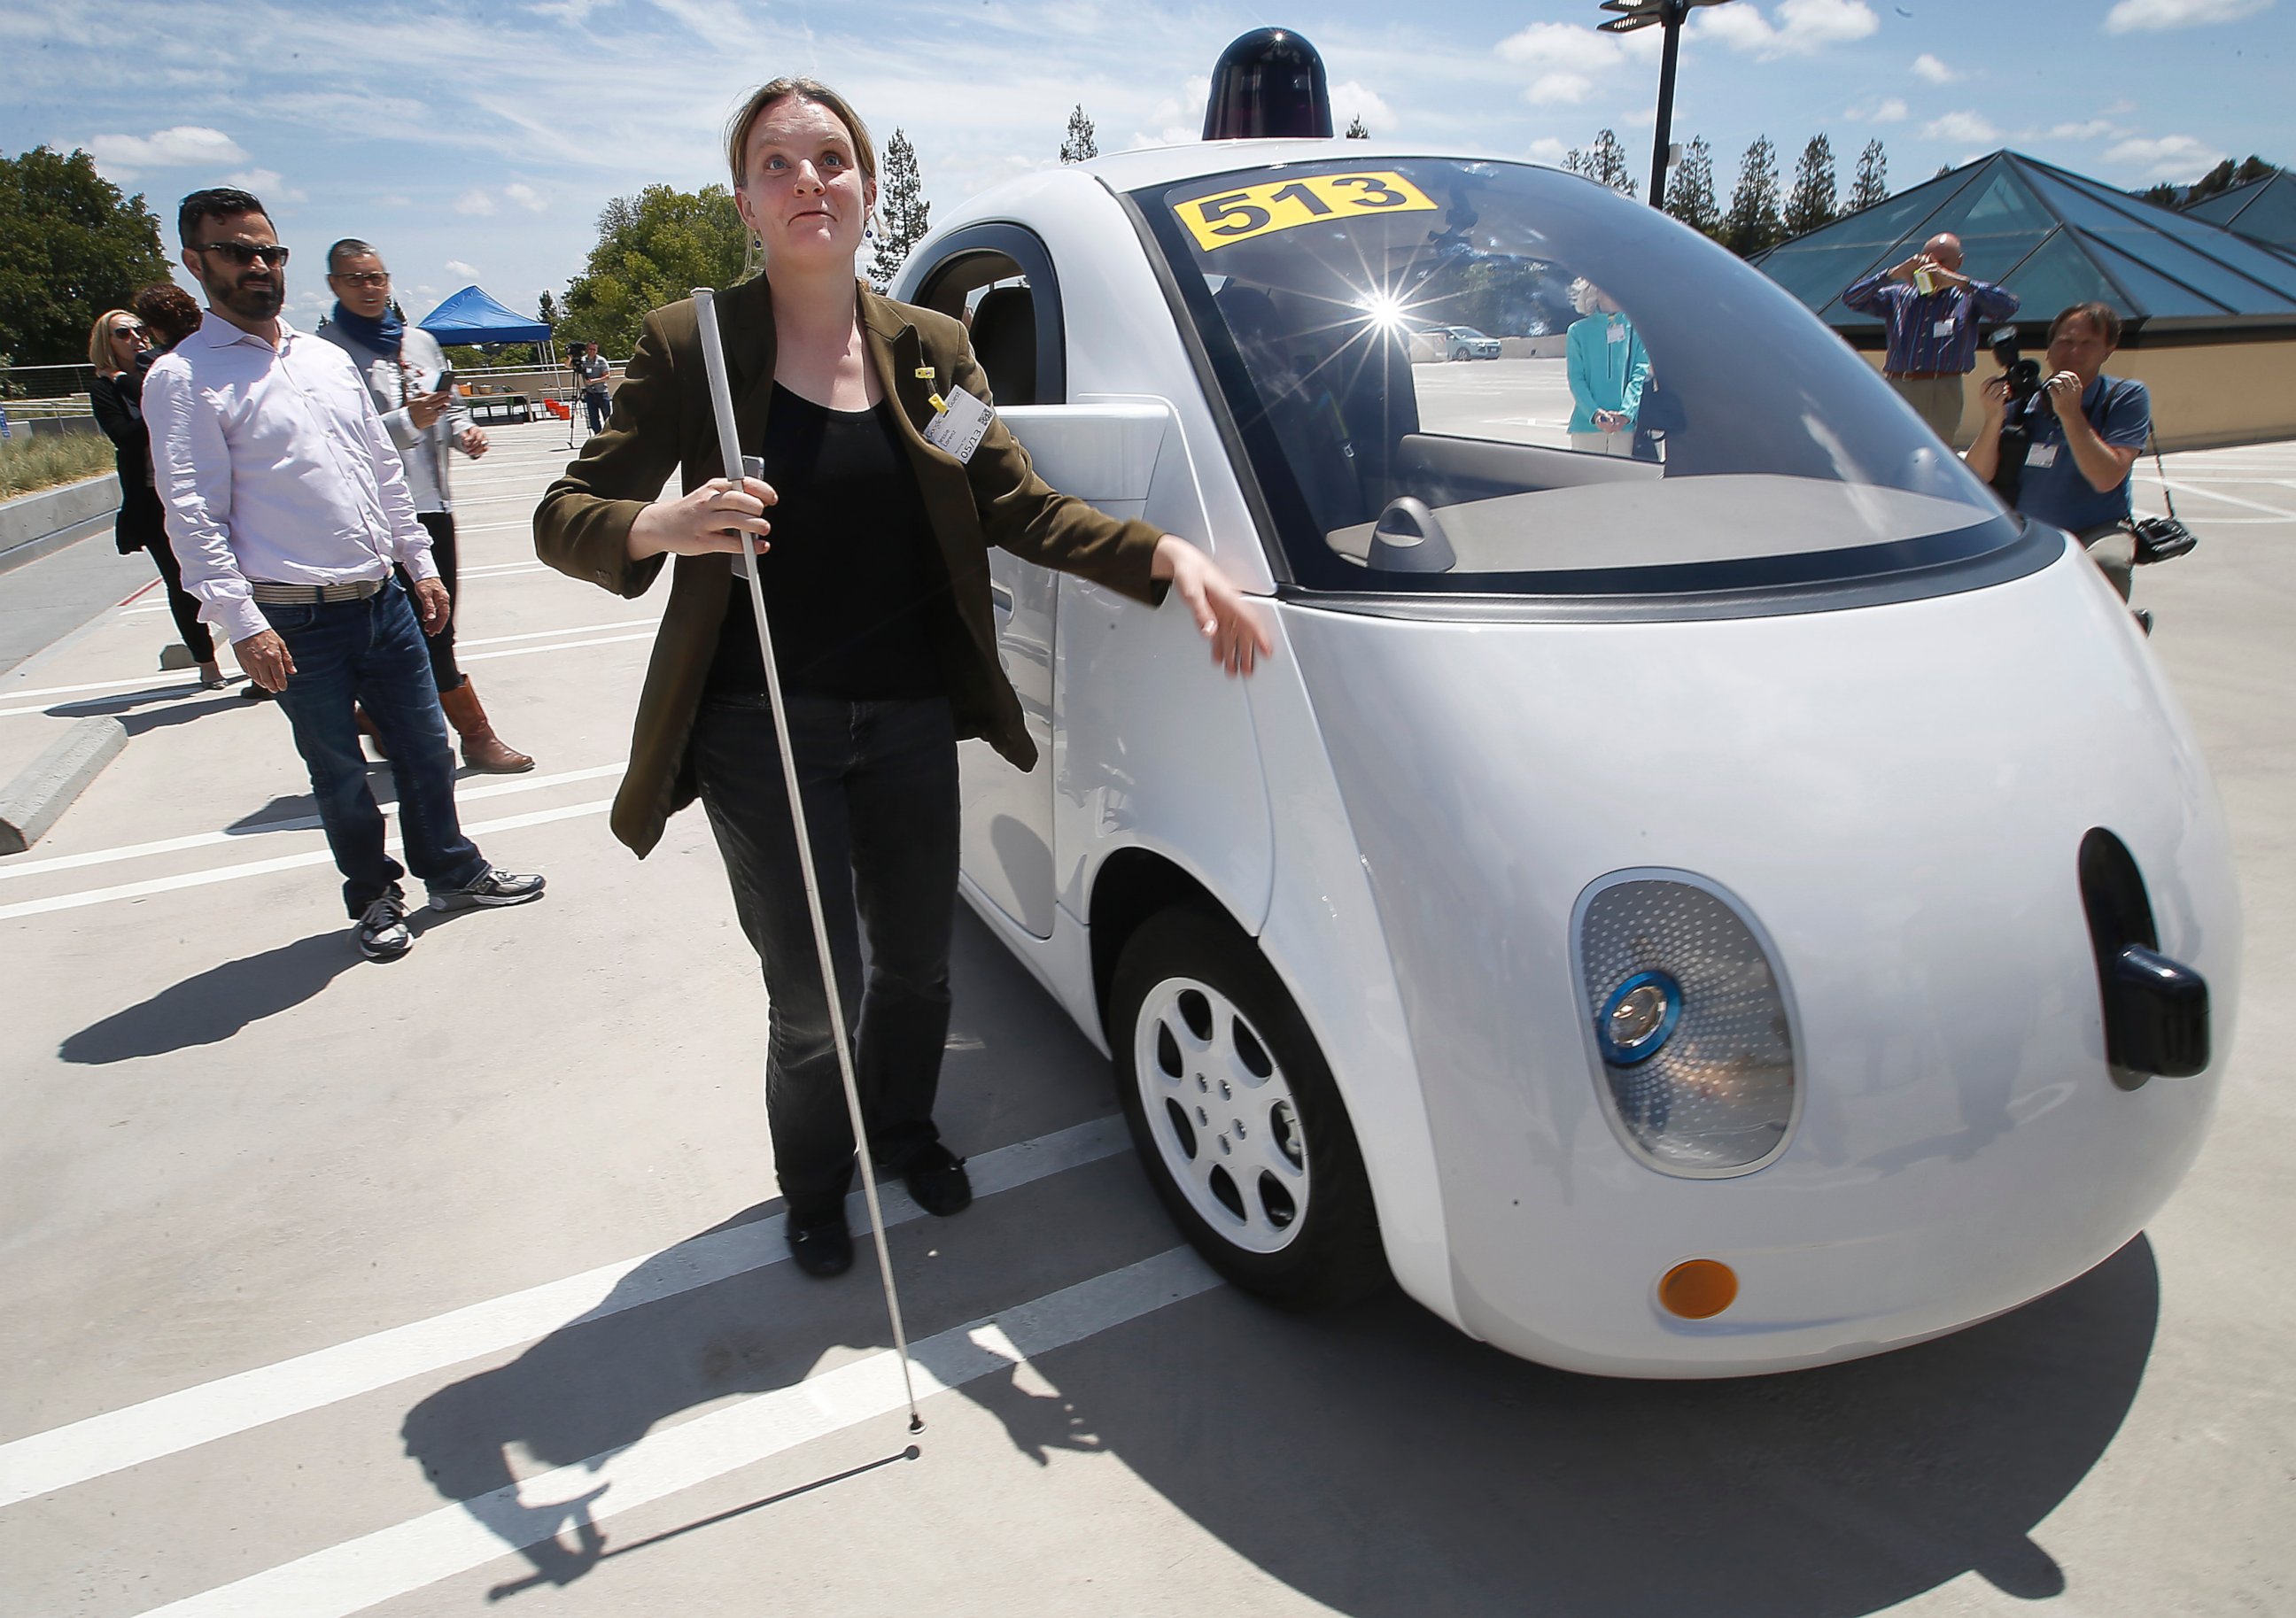 PHOTO: Jessie Lorenz, of San Francisco, touches the new Google self-driving prototype car during a demonstration at the Google campus in Mountain View, Calif.